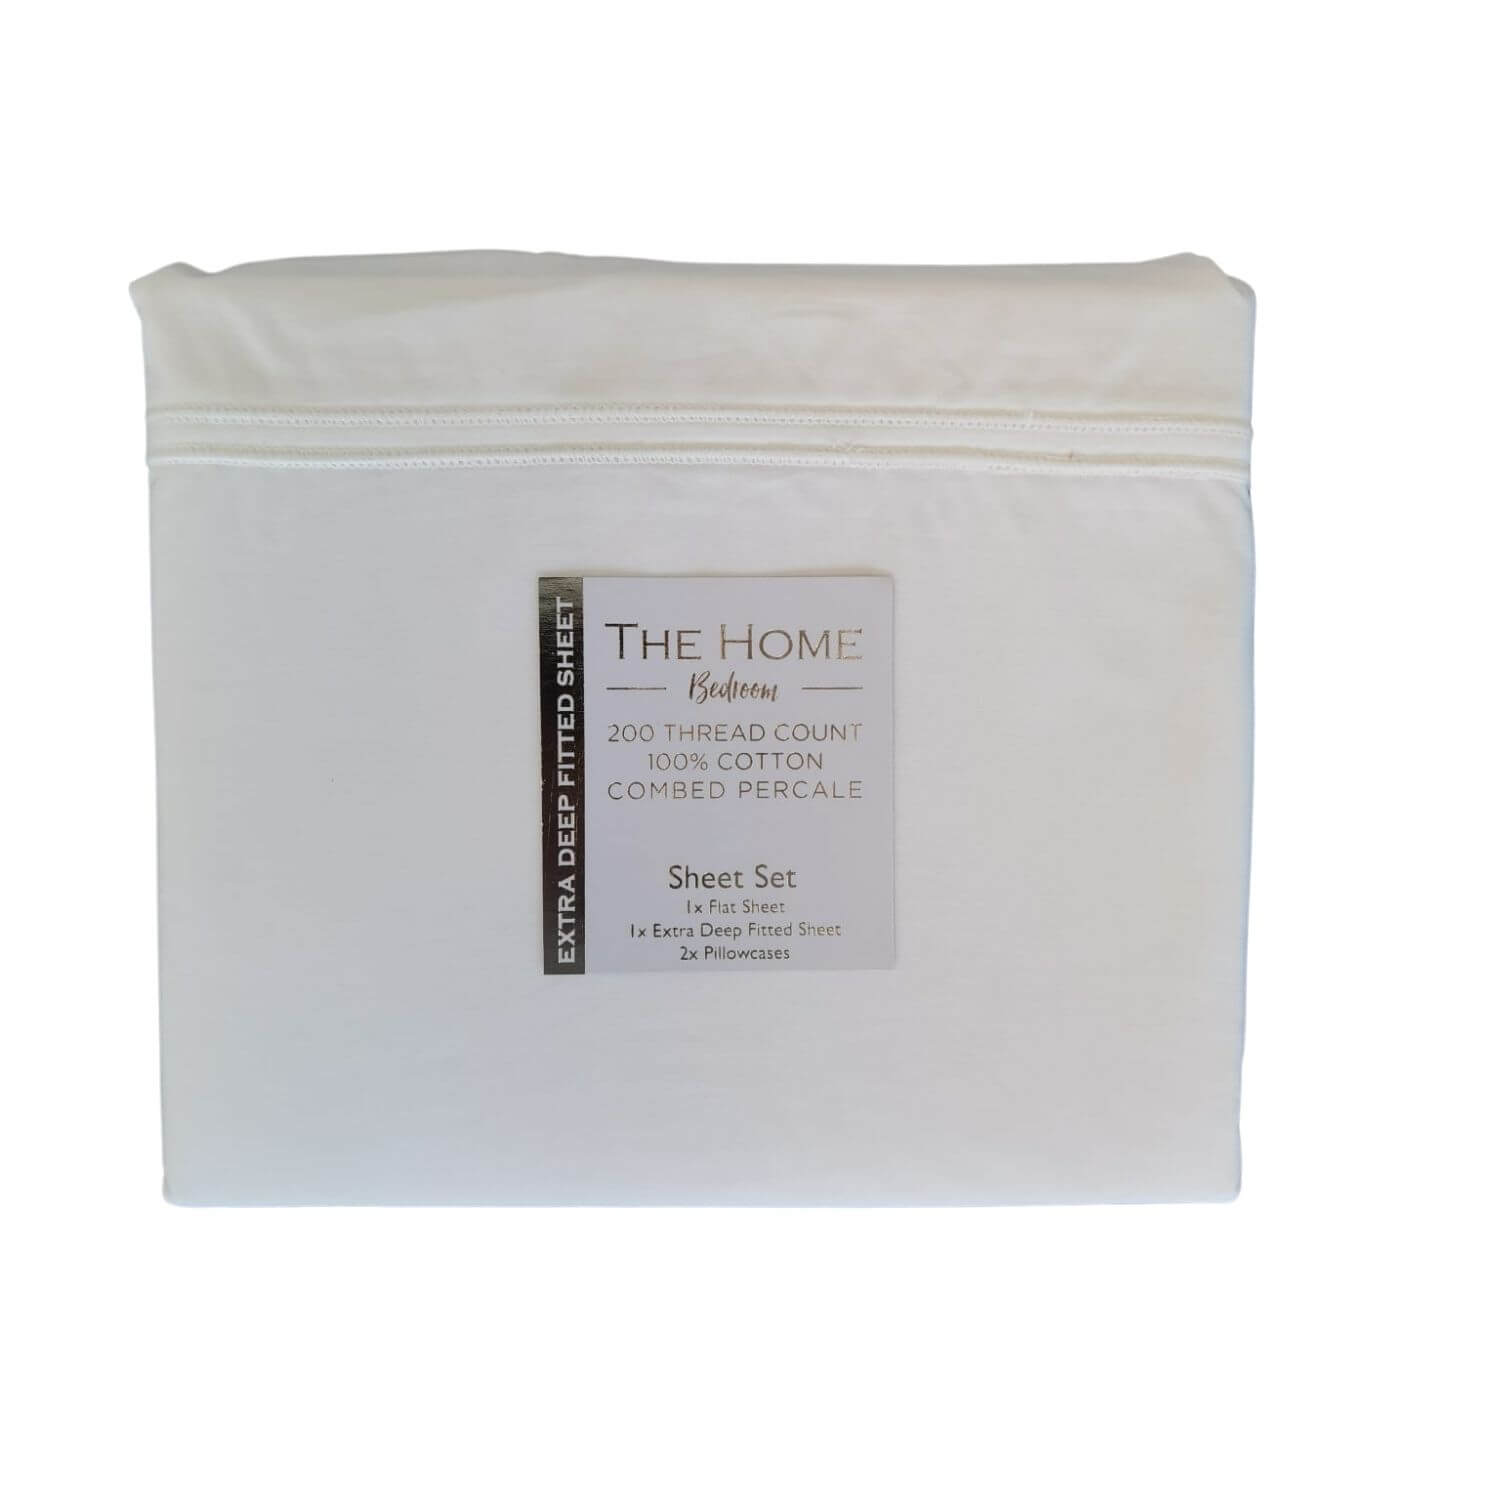 The Home Bedroom 200 Thread 100% Count Cotton Sheet Set - White 1 Shaws Department Stores